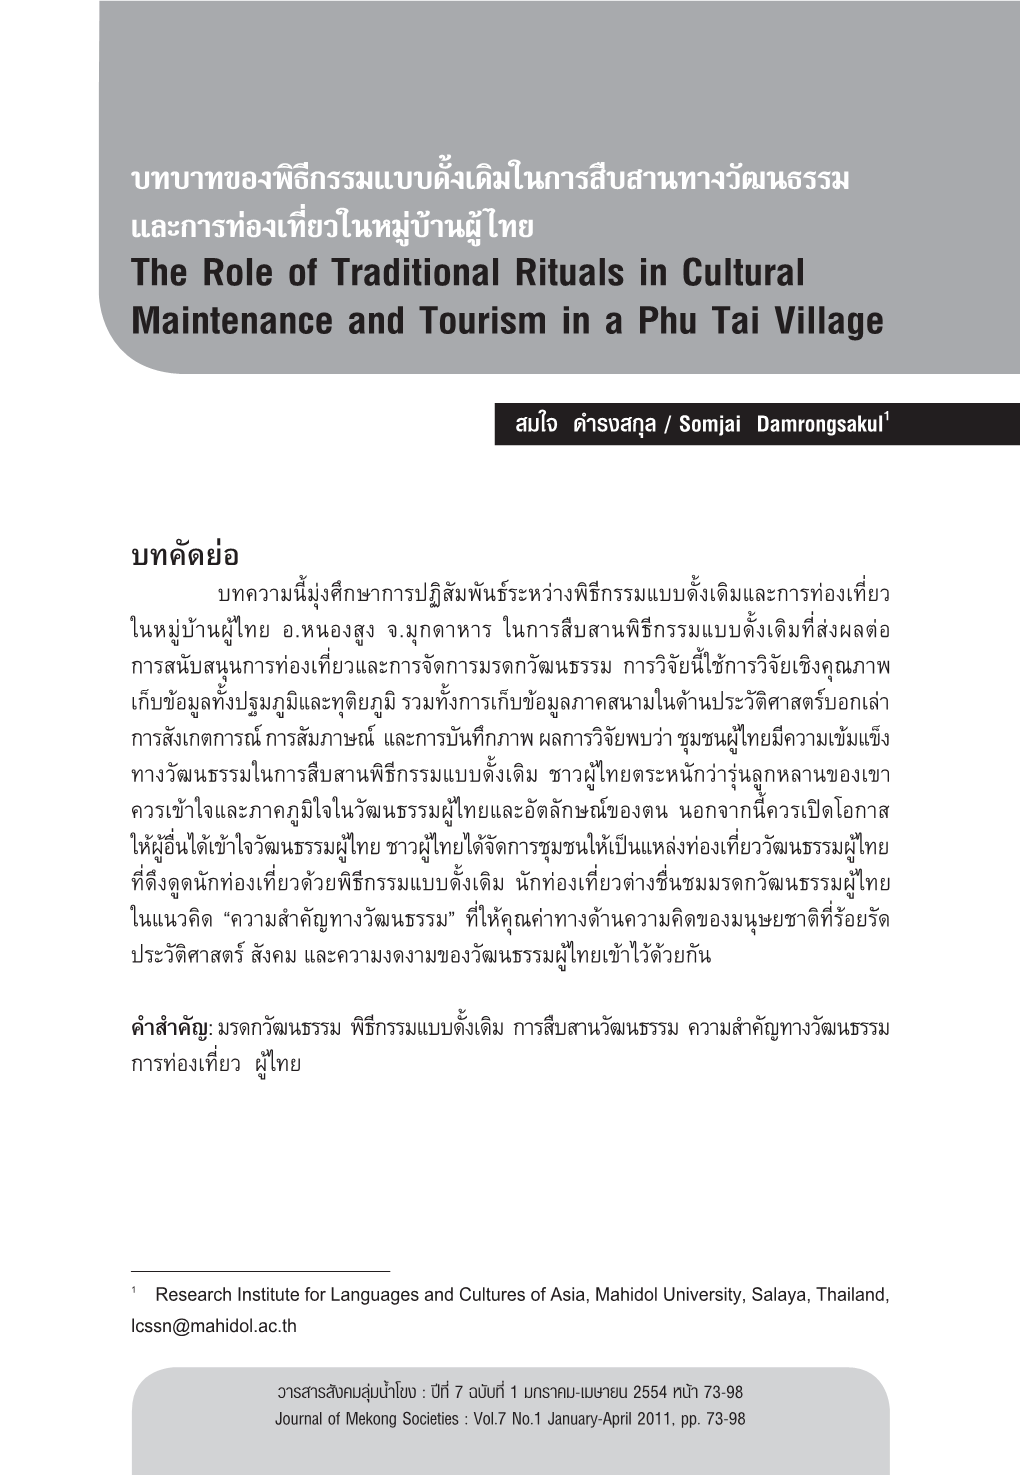 The Role of Traditional Rituals in Cultural Maintenance and Tourism in a Phu Tai Village